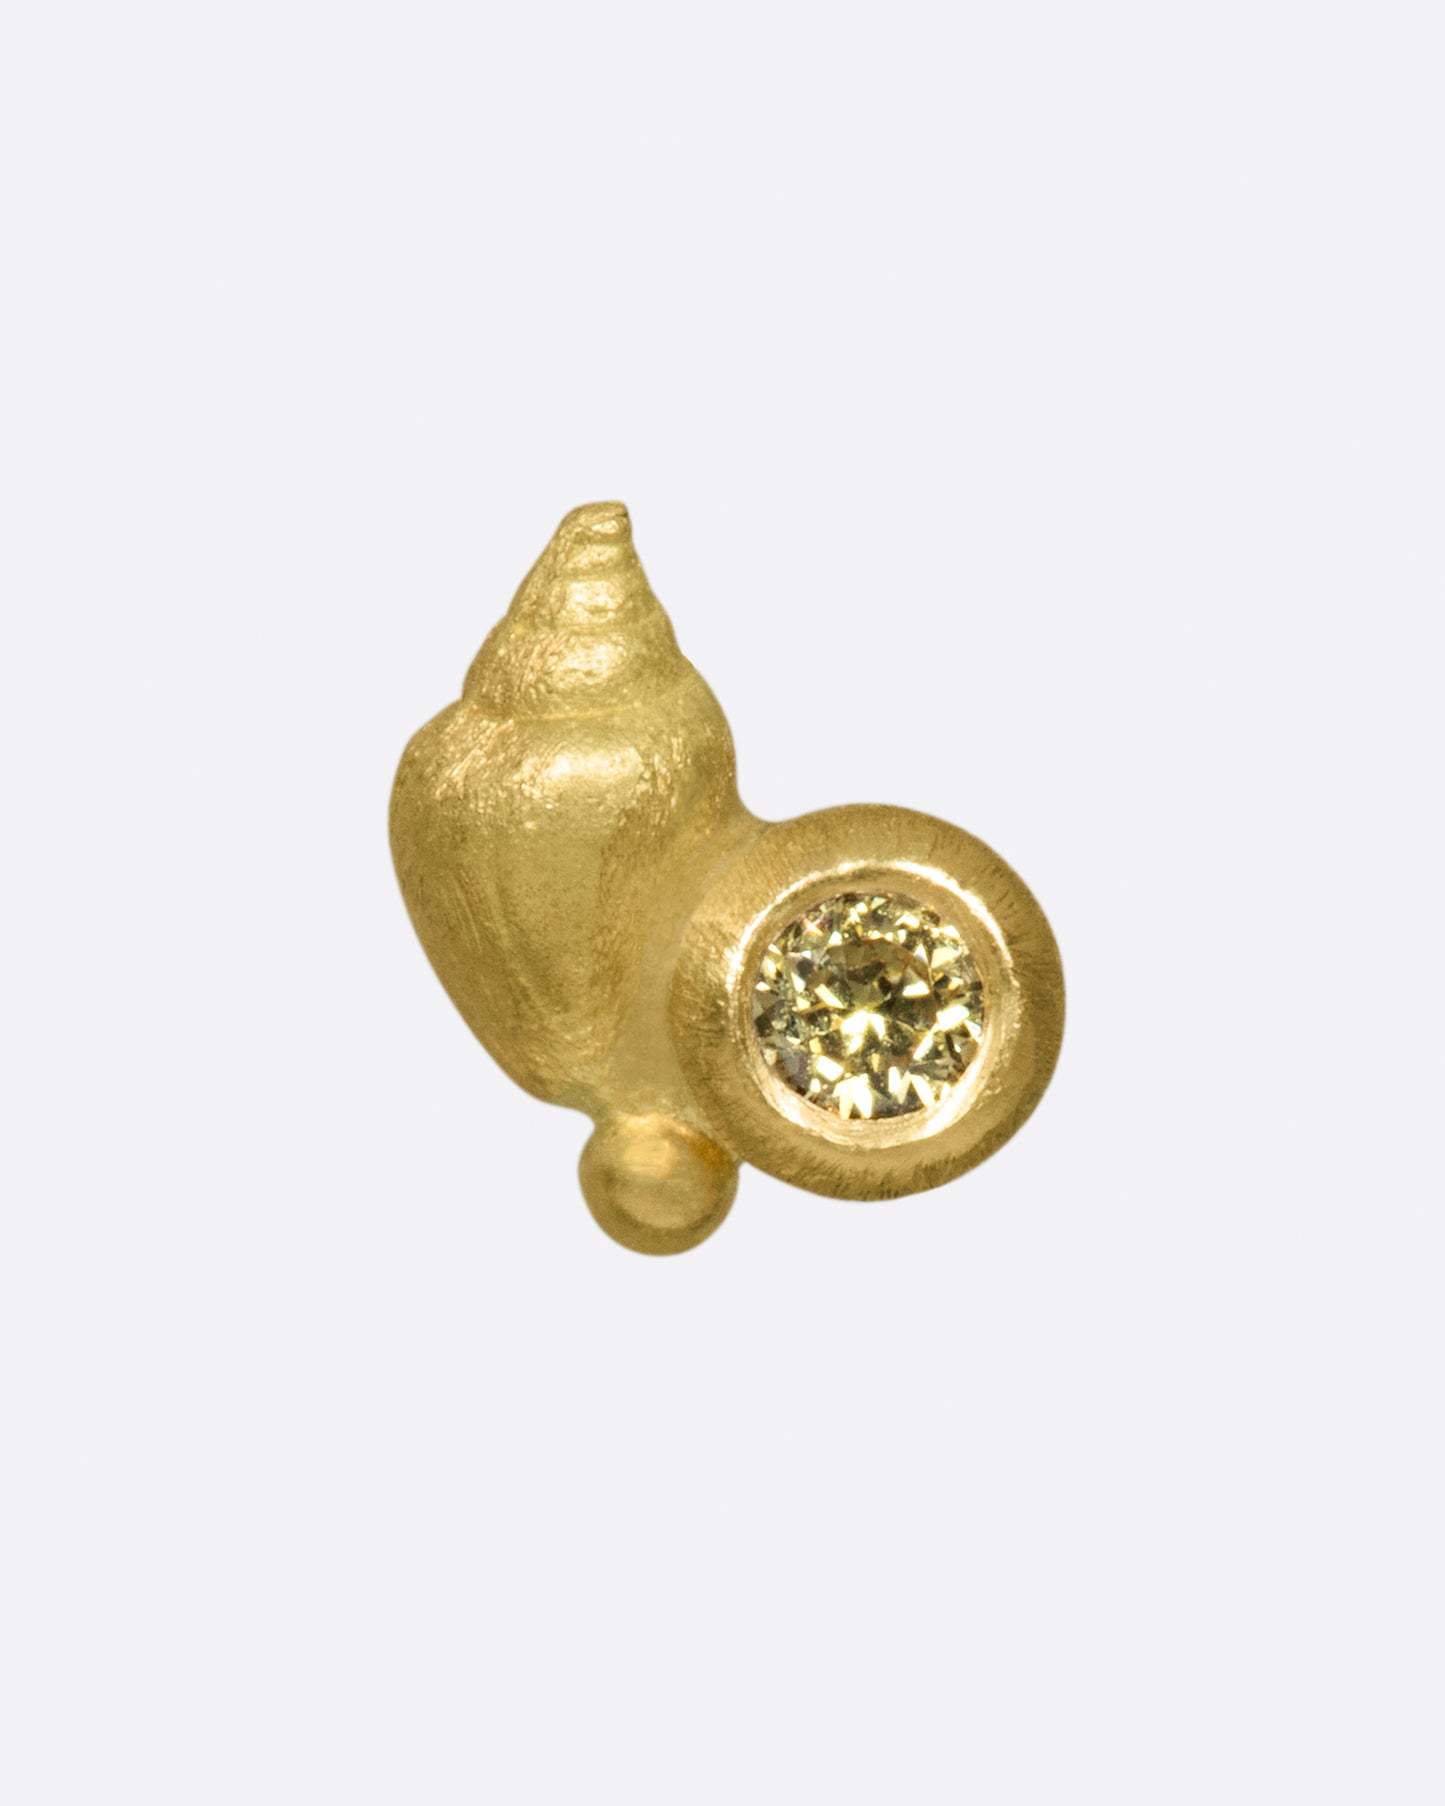 A matte gold sea shell accented by a pale yellow diamond.